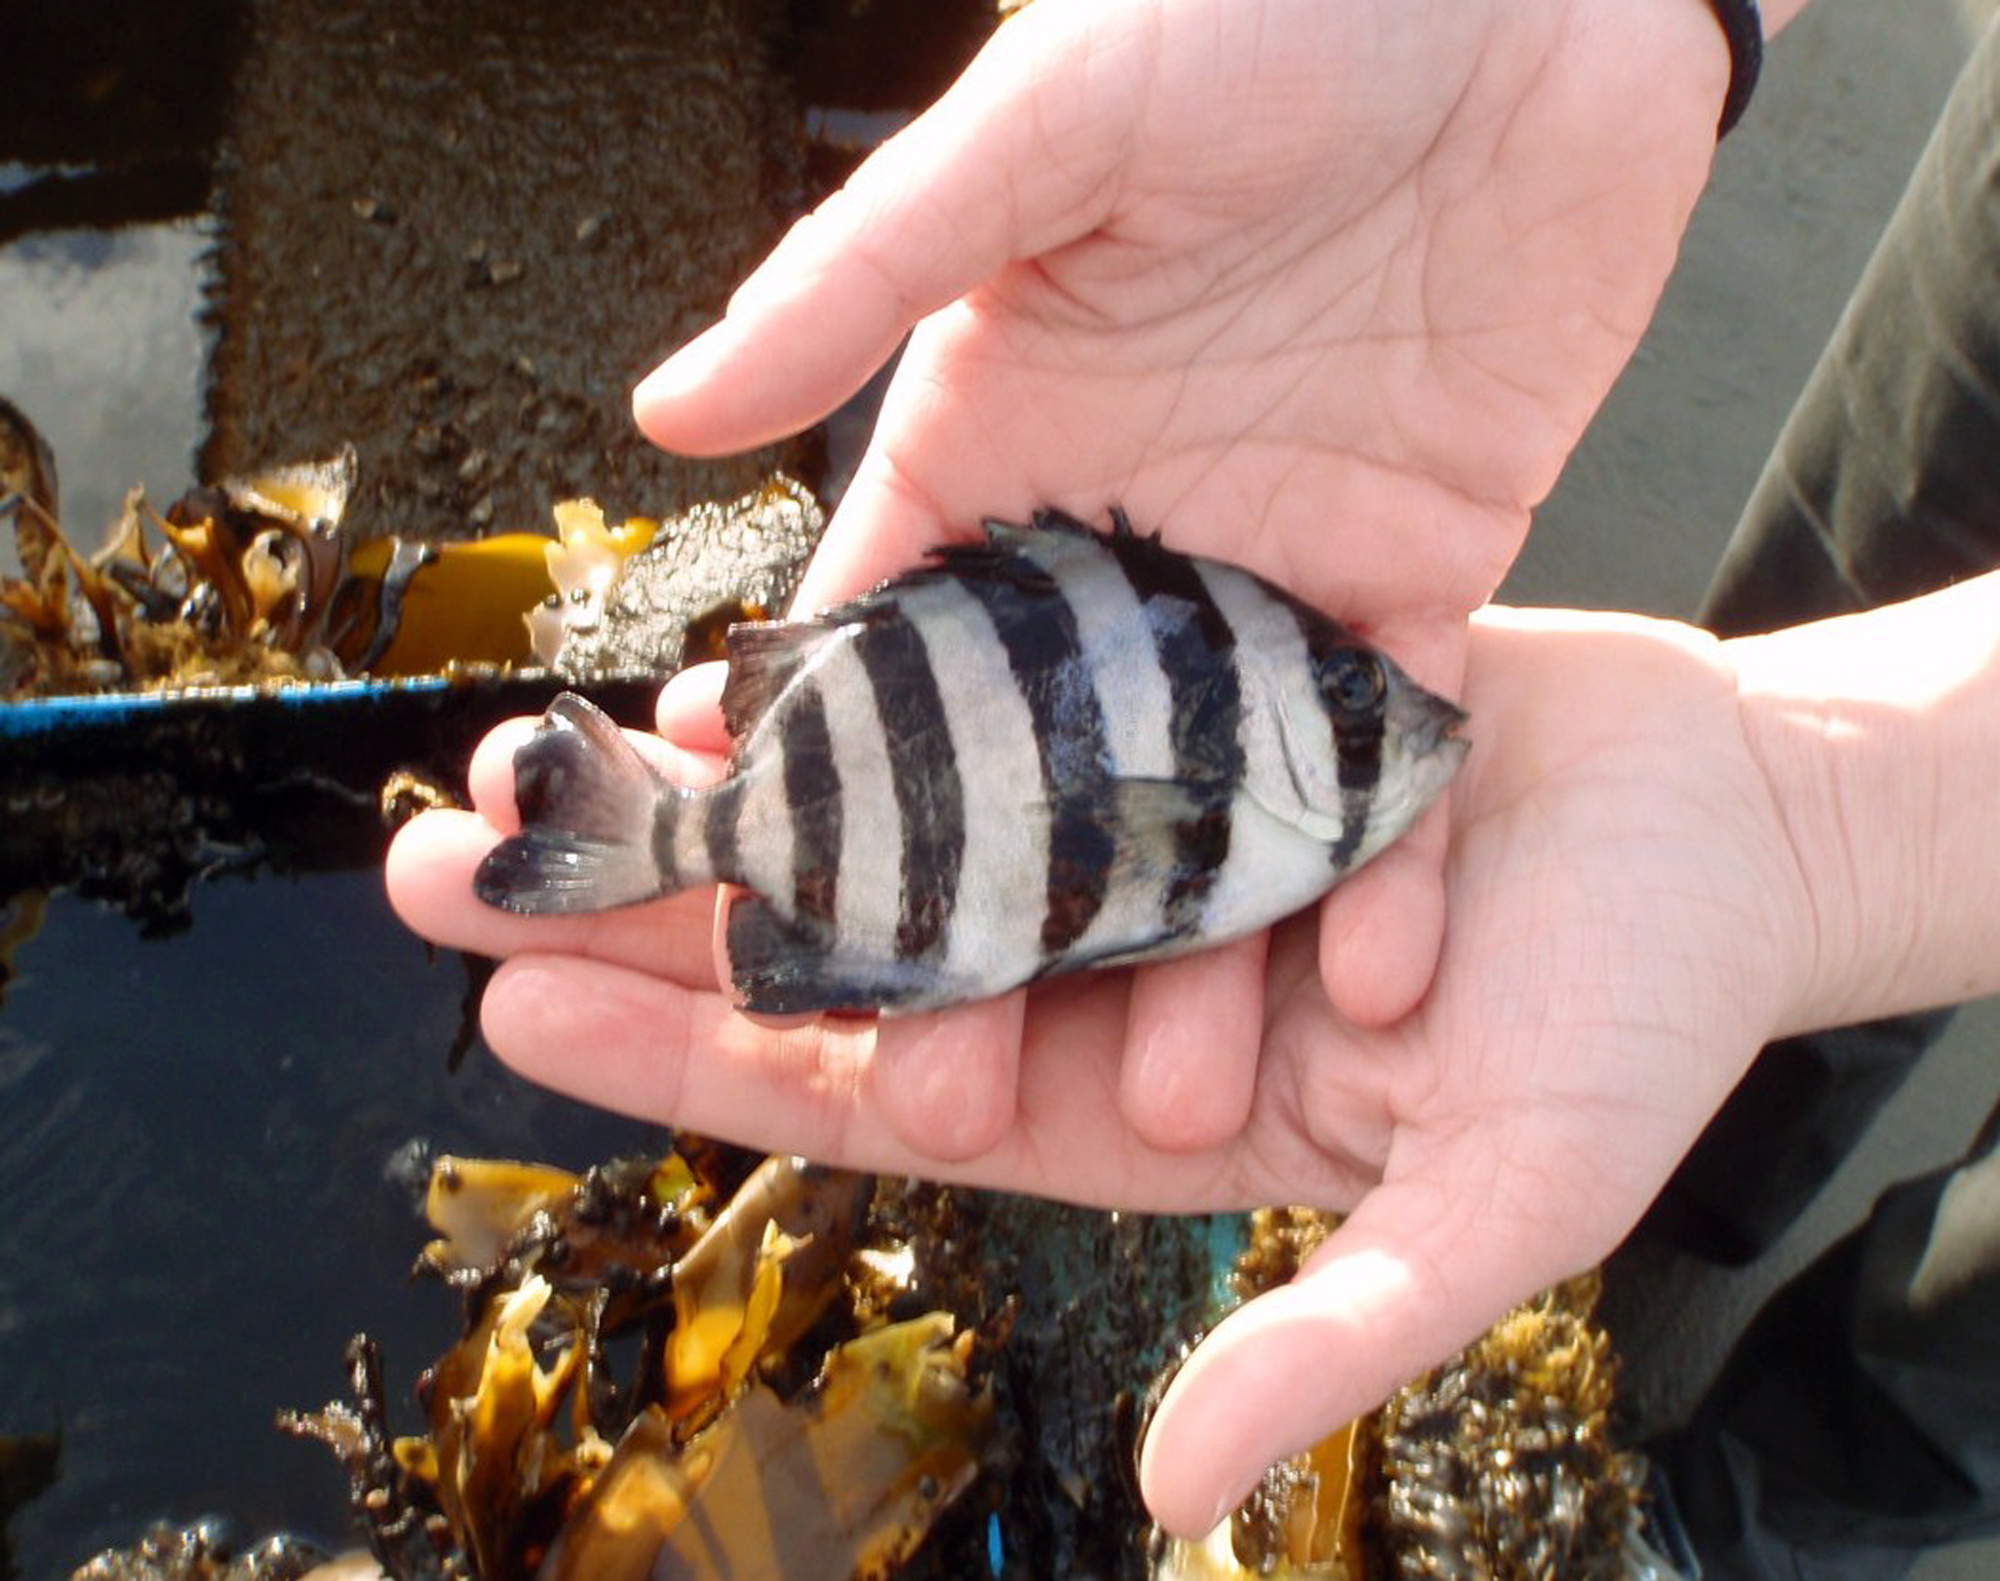 In this March 22, 2013 photo provided by the Washington state Department of Fish and Wildlife, a striped beakfish is held for display above a water-filled well or bait box aboard a 20-foot-long Japanese boat that washed ashore recently at Long Beach, Wash. Biologists say five of the fish, plus other Japanese species of sea creatures, arrived alive, apparently hitching a ride across the Pacific Ocean on debris believed to have come from the March 2011 Japanese tsunami.